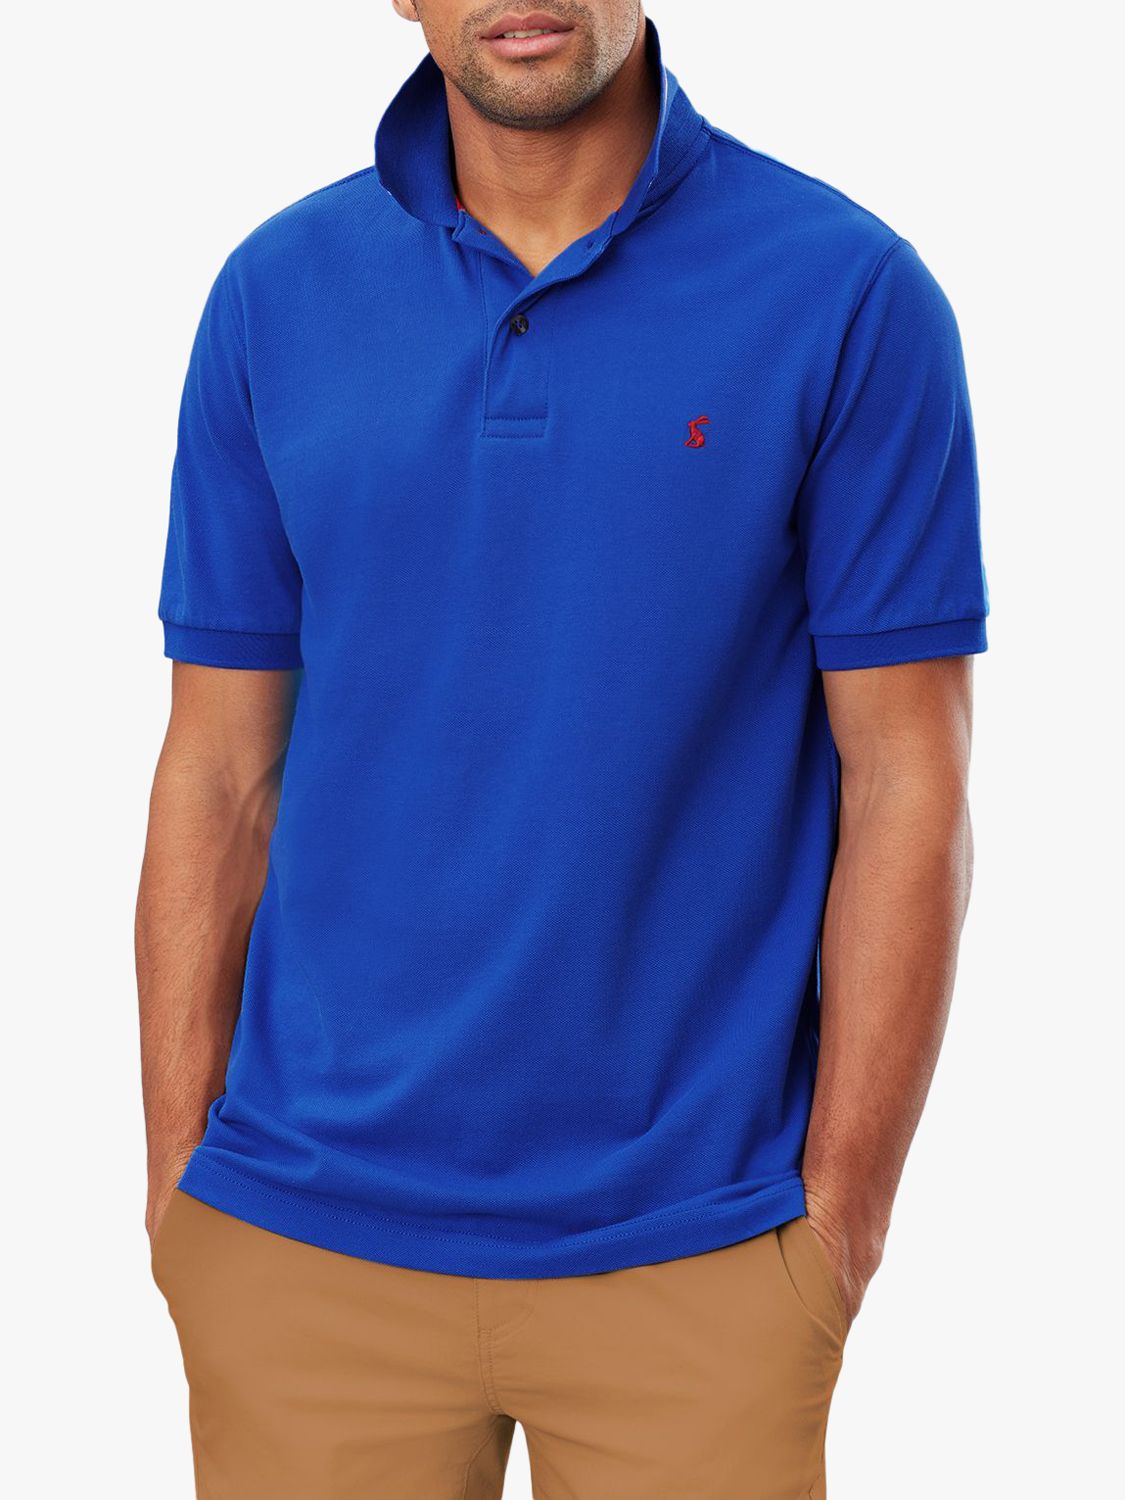 Joules Woody Slim Fit Polo Shirt, Blue at John Lewis & Partners